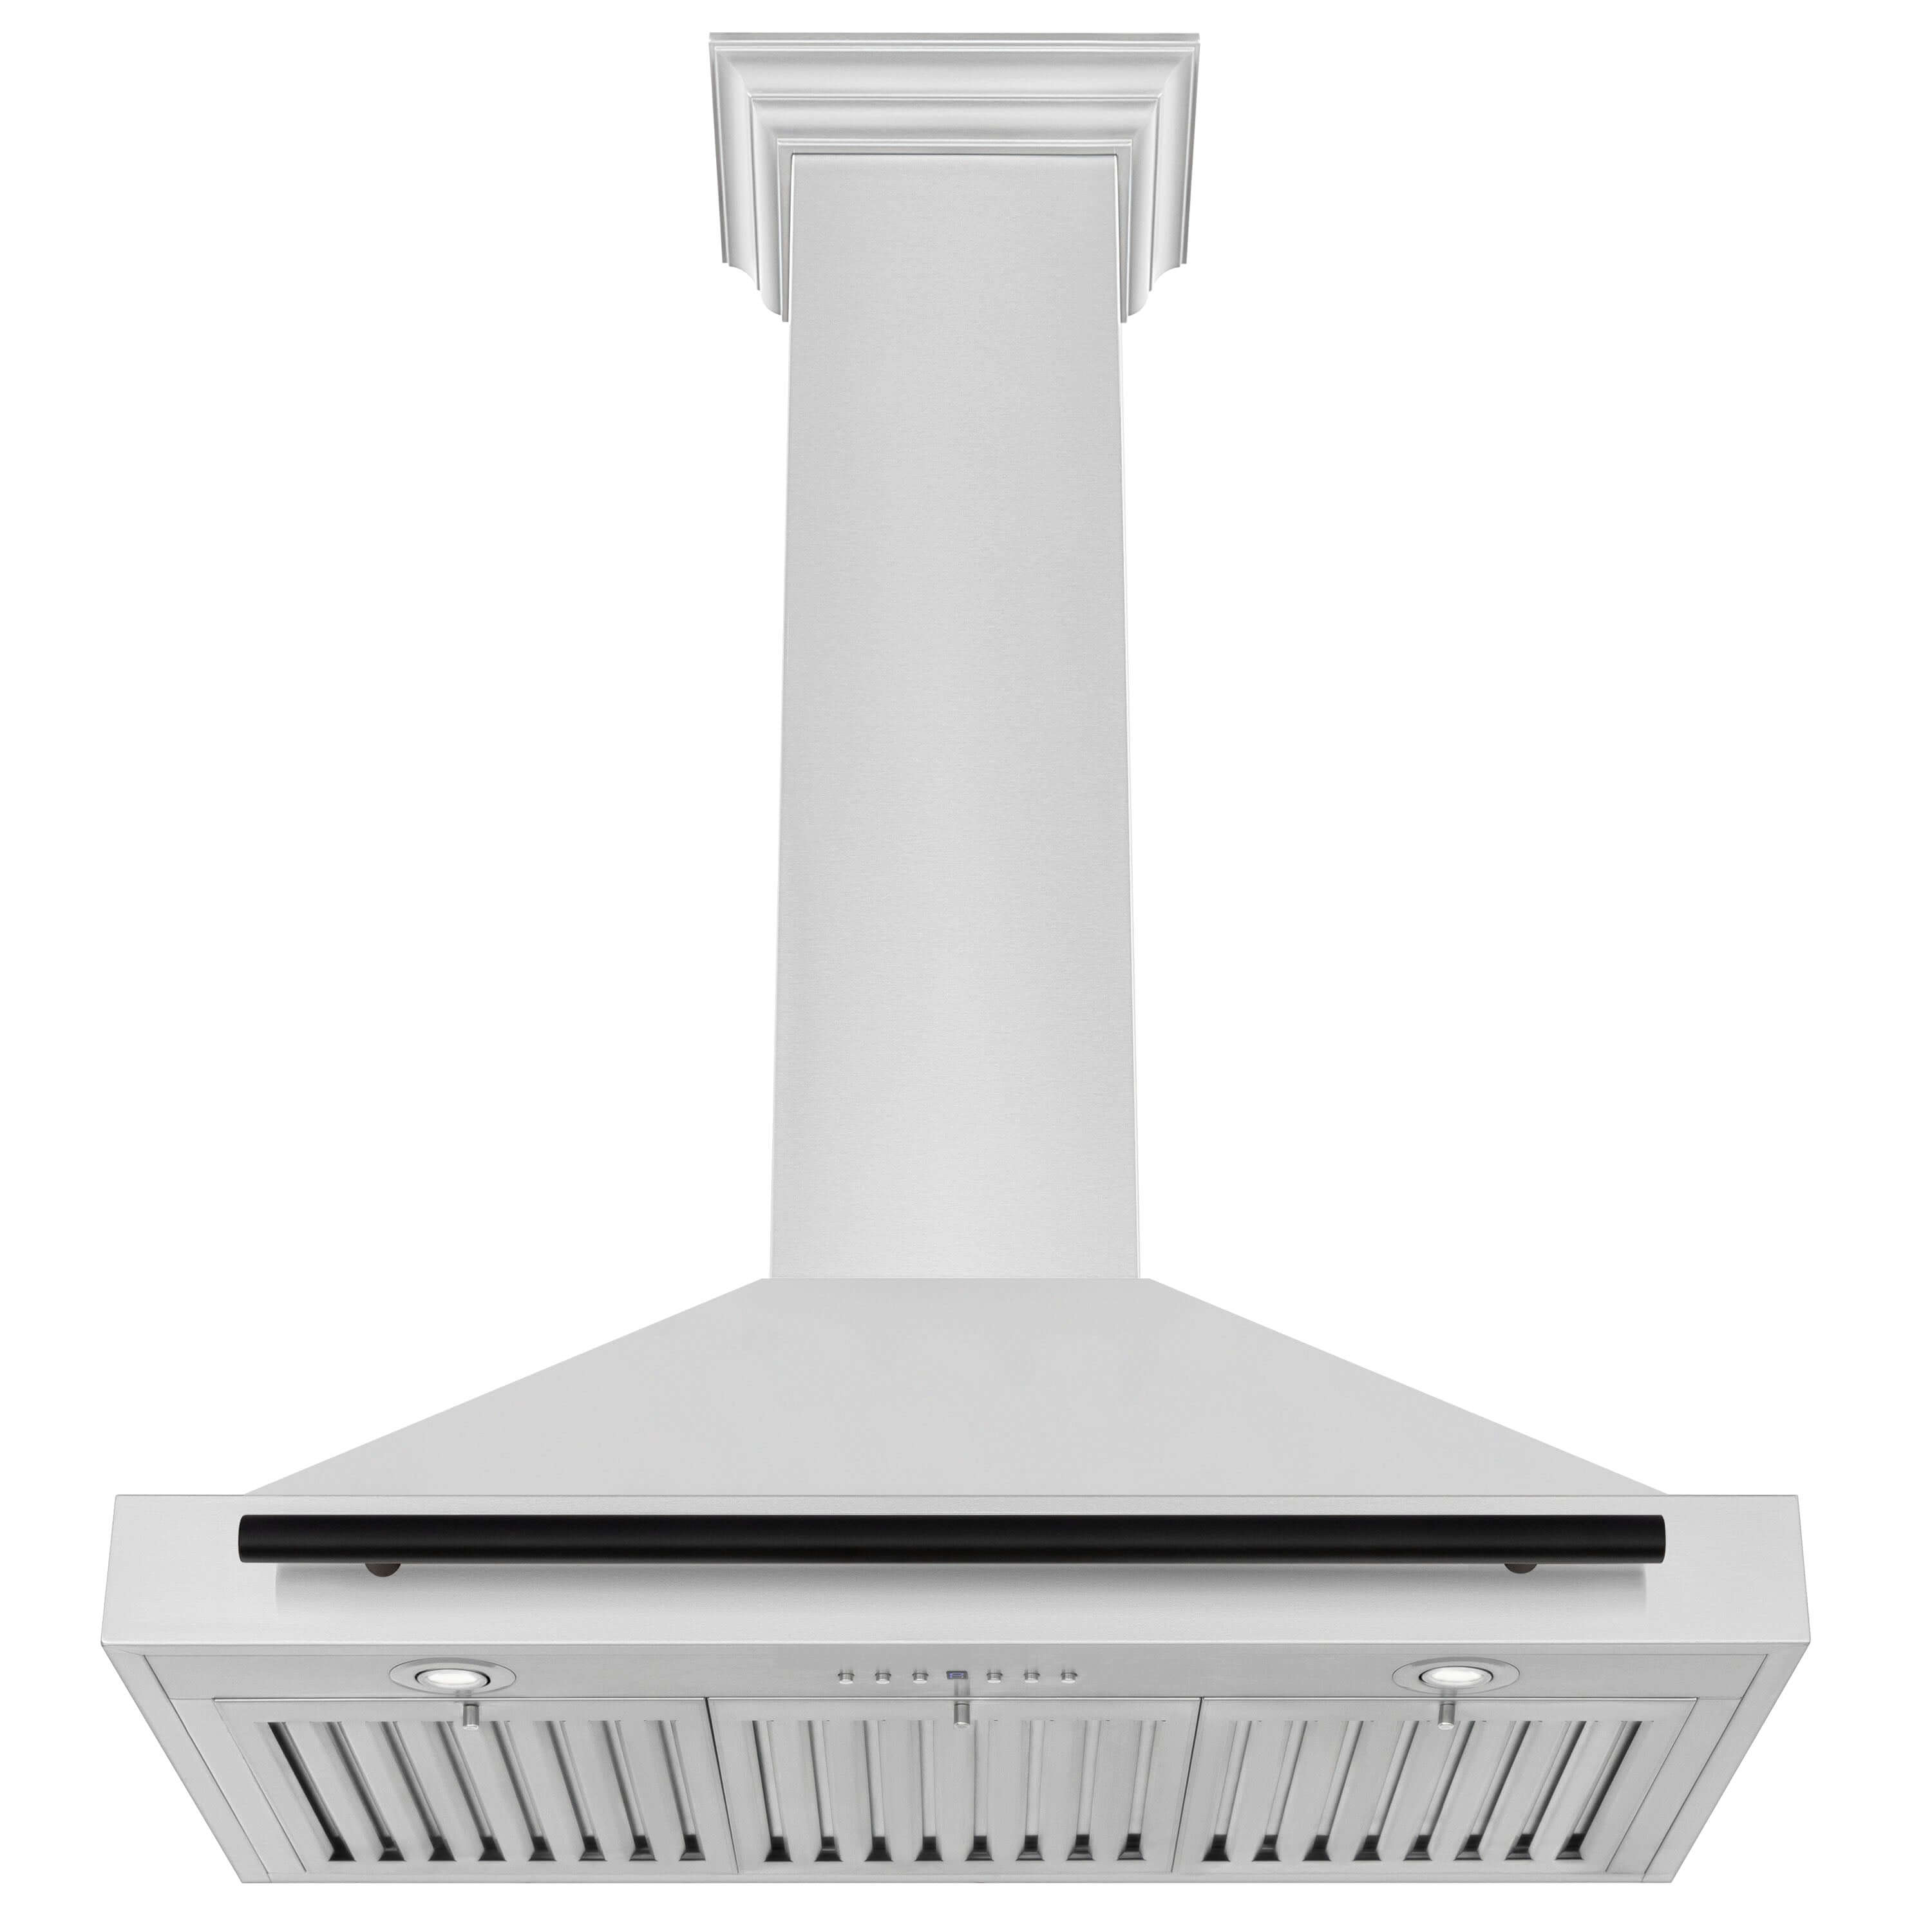 ZLINE Autograph Edition 36 in. Stainless Steel Range Hood with Stainless Steel Shell and Accents (KB4STZ-36) front, under.